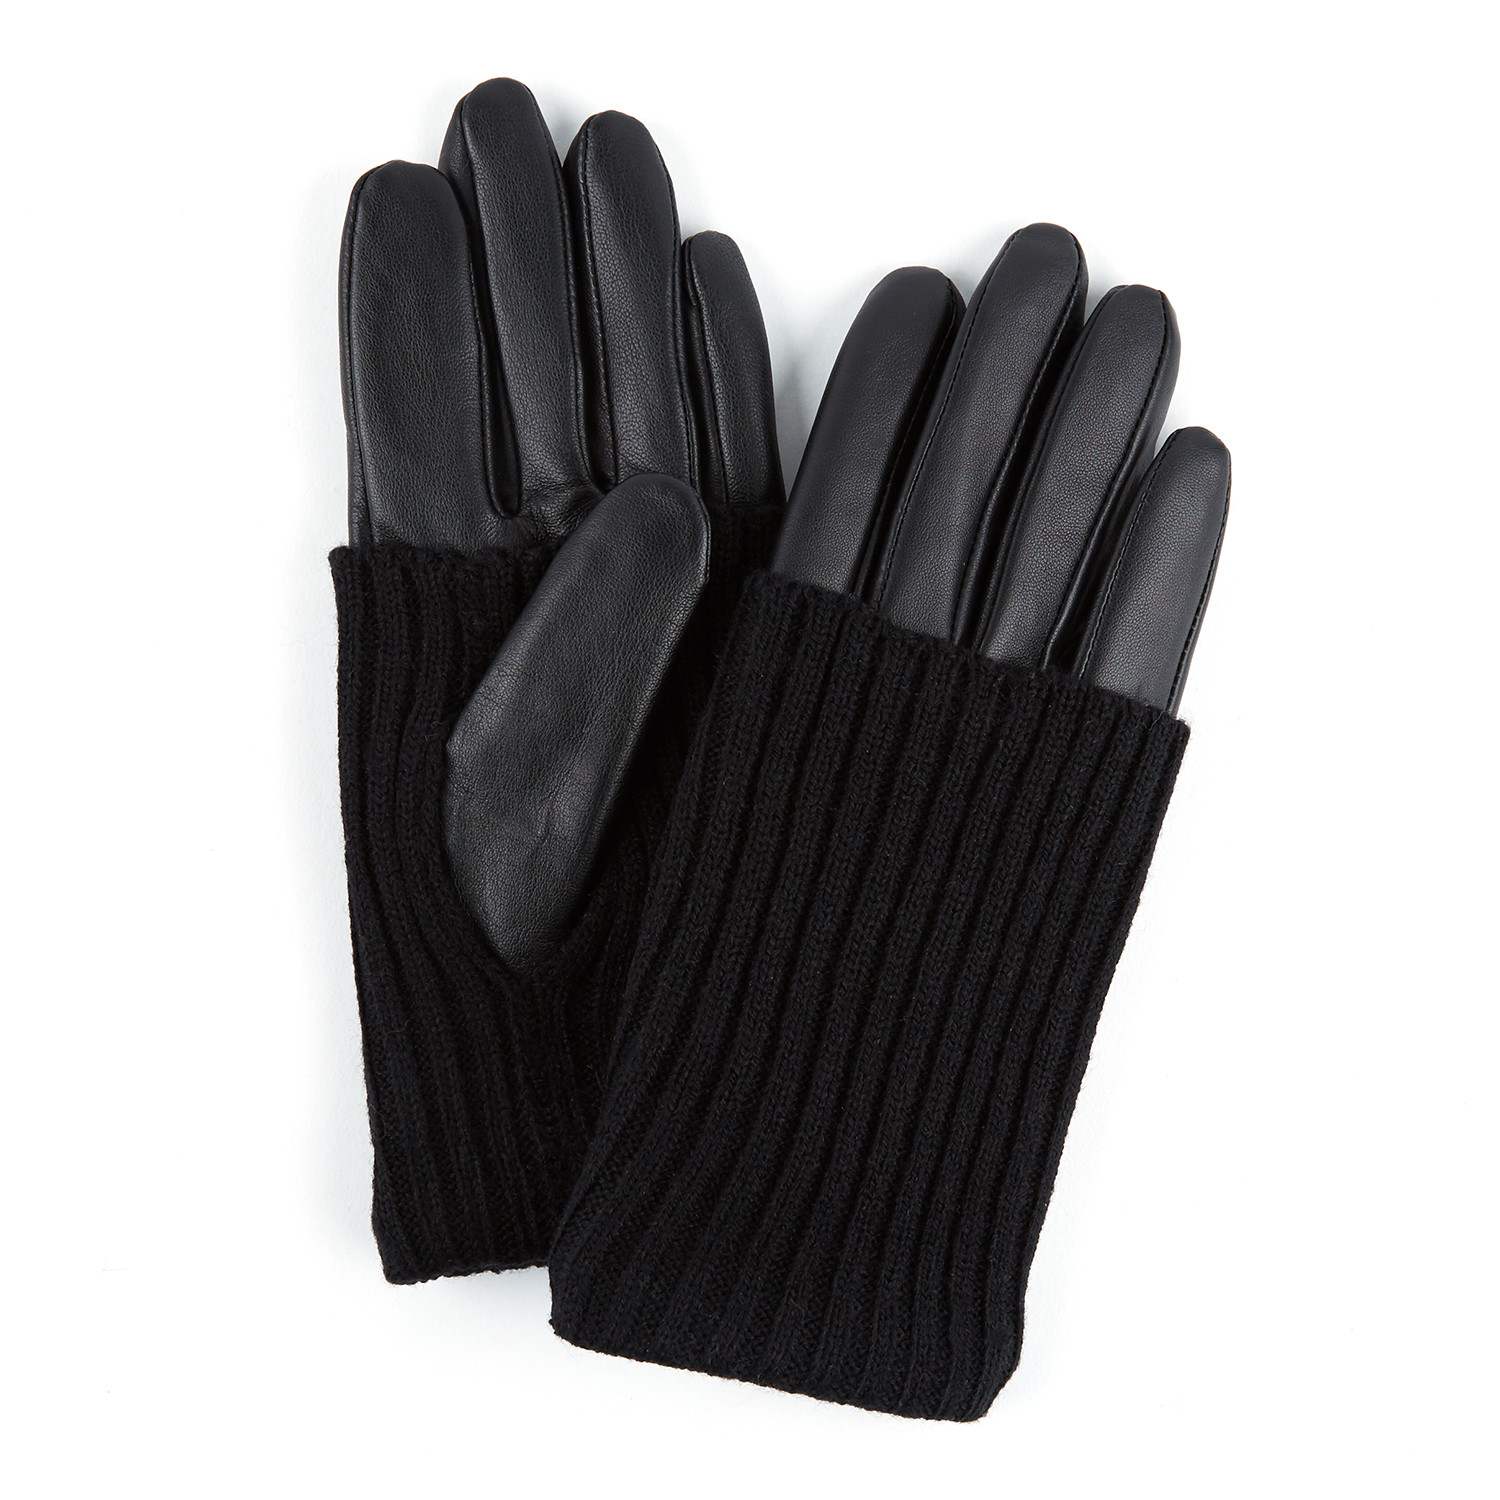 gloves with tips cut off